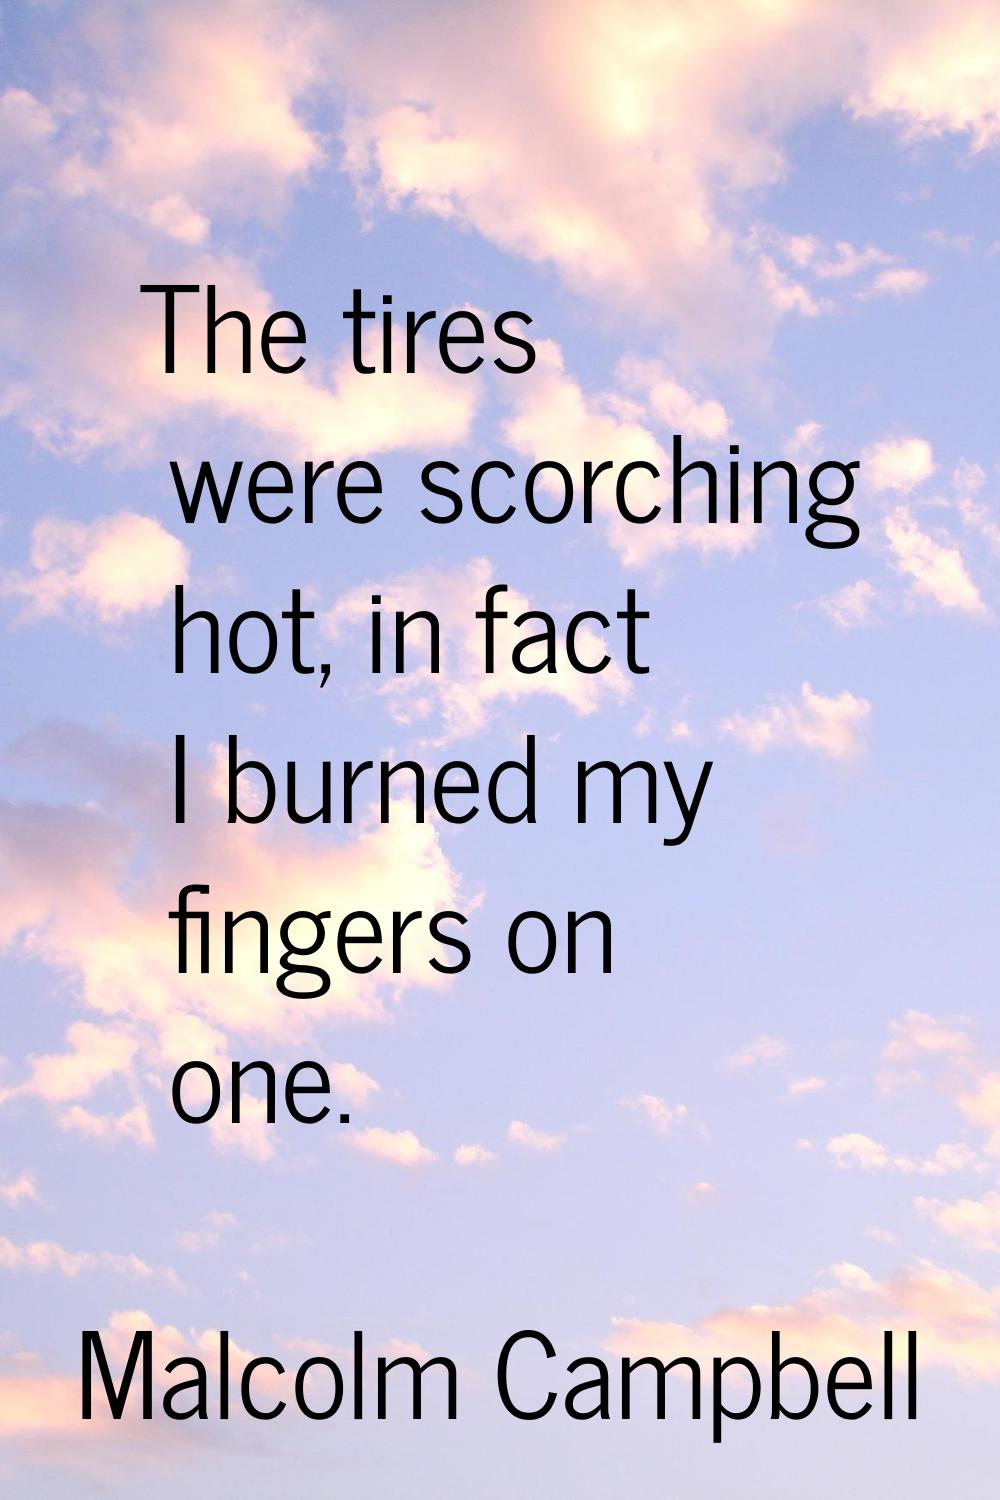 The tires were scorching hot, in fact I burned my fingers on one.